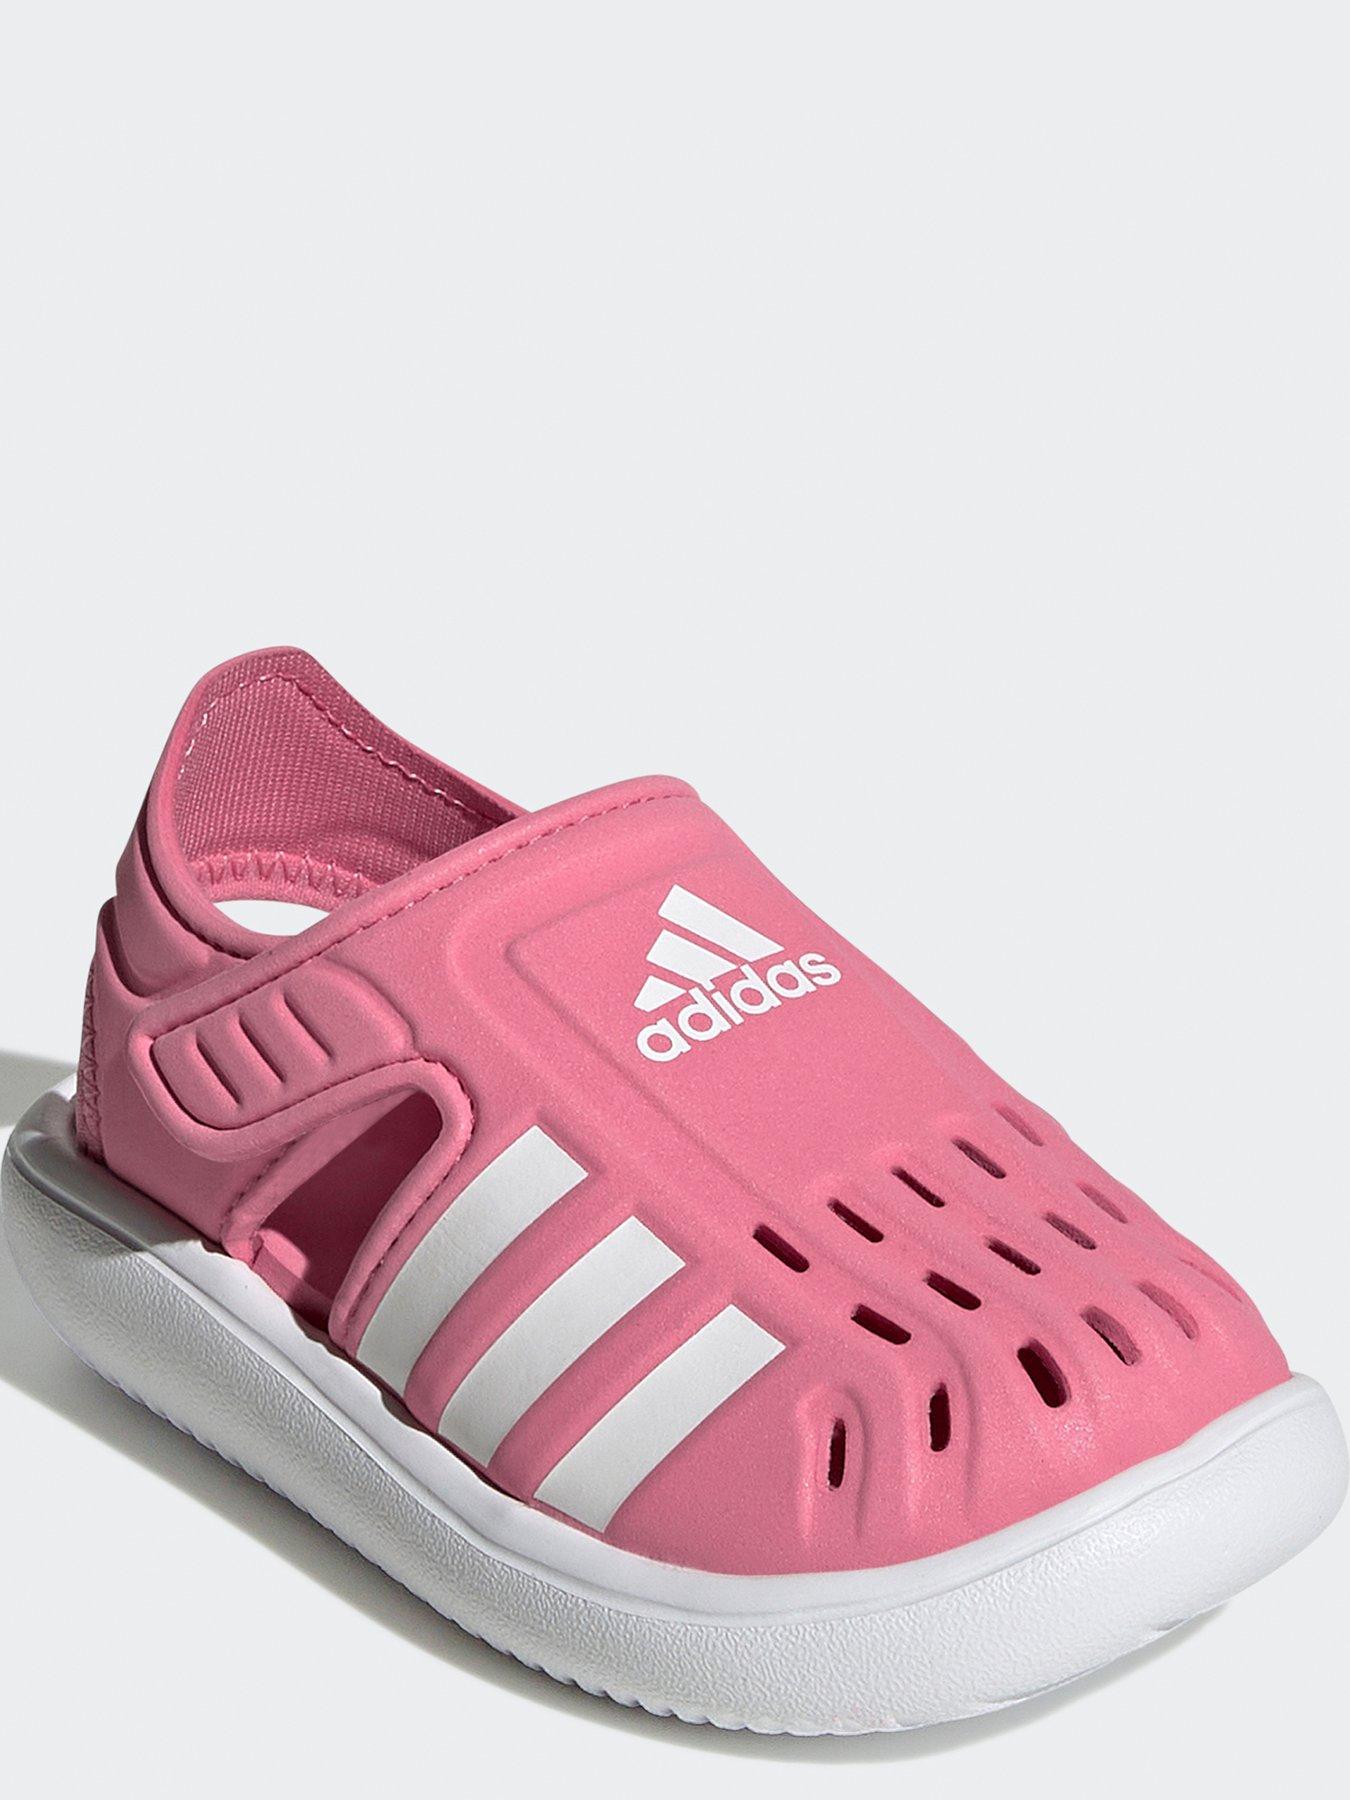 adidas Closed-toe Summer Water Sandals | very.co.uk